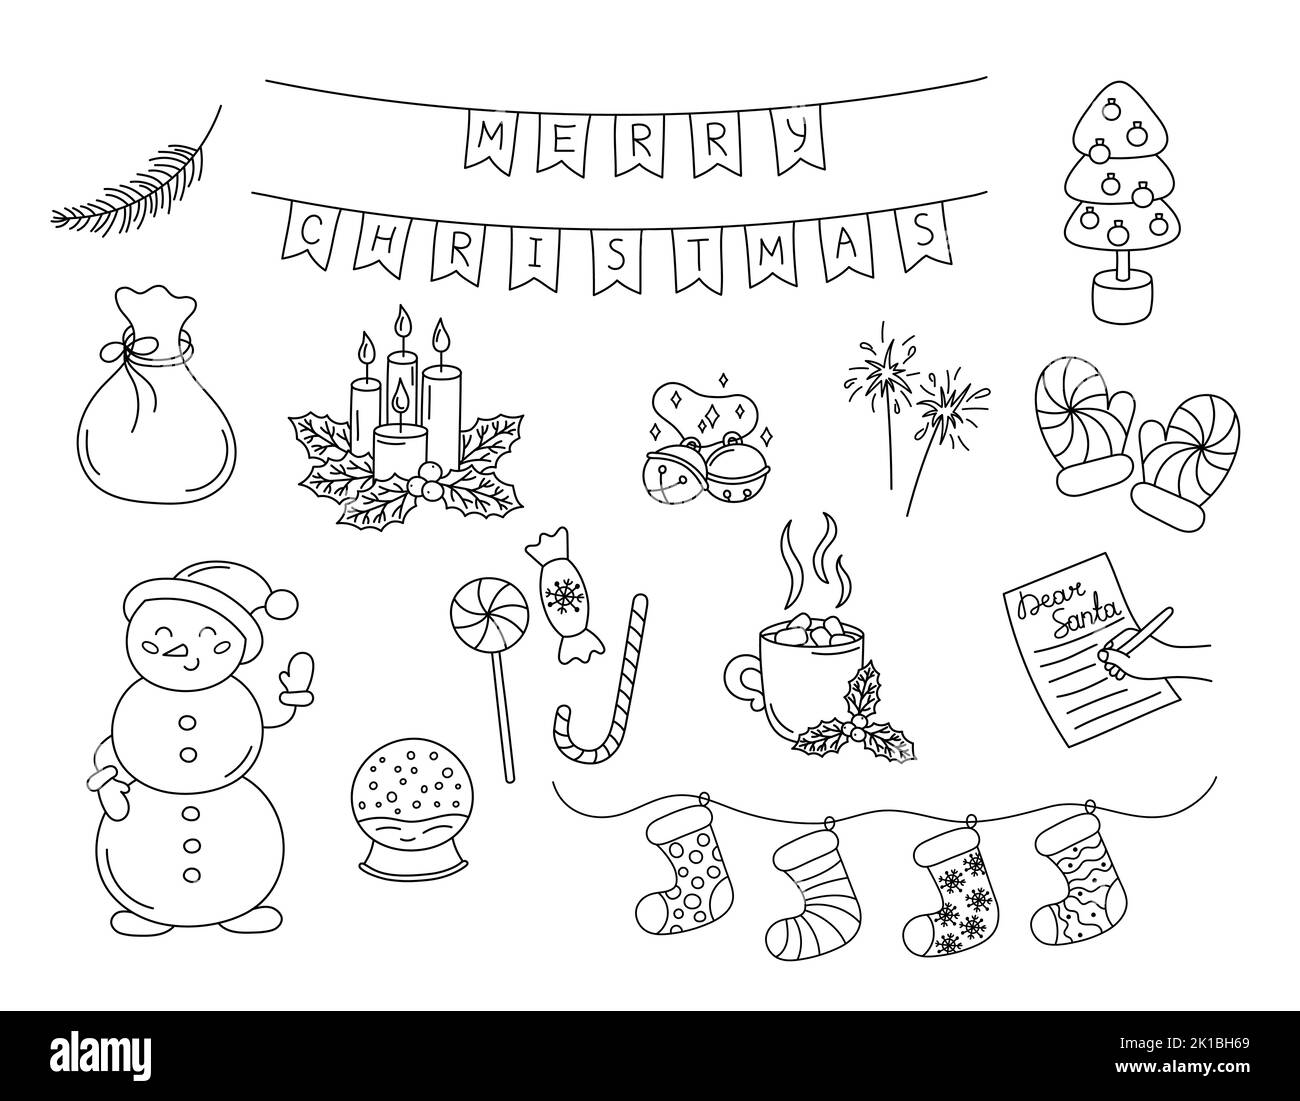 Christmas doodles vector set. Hand drawn black holiday elements isolated on white background. Christmas scribble outline objects tree, snowman, socks, Stock Vector